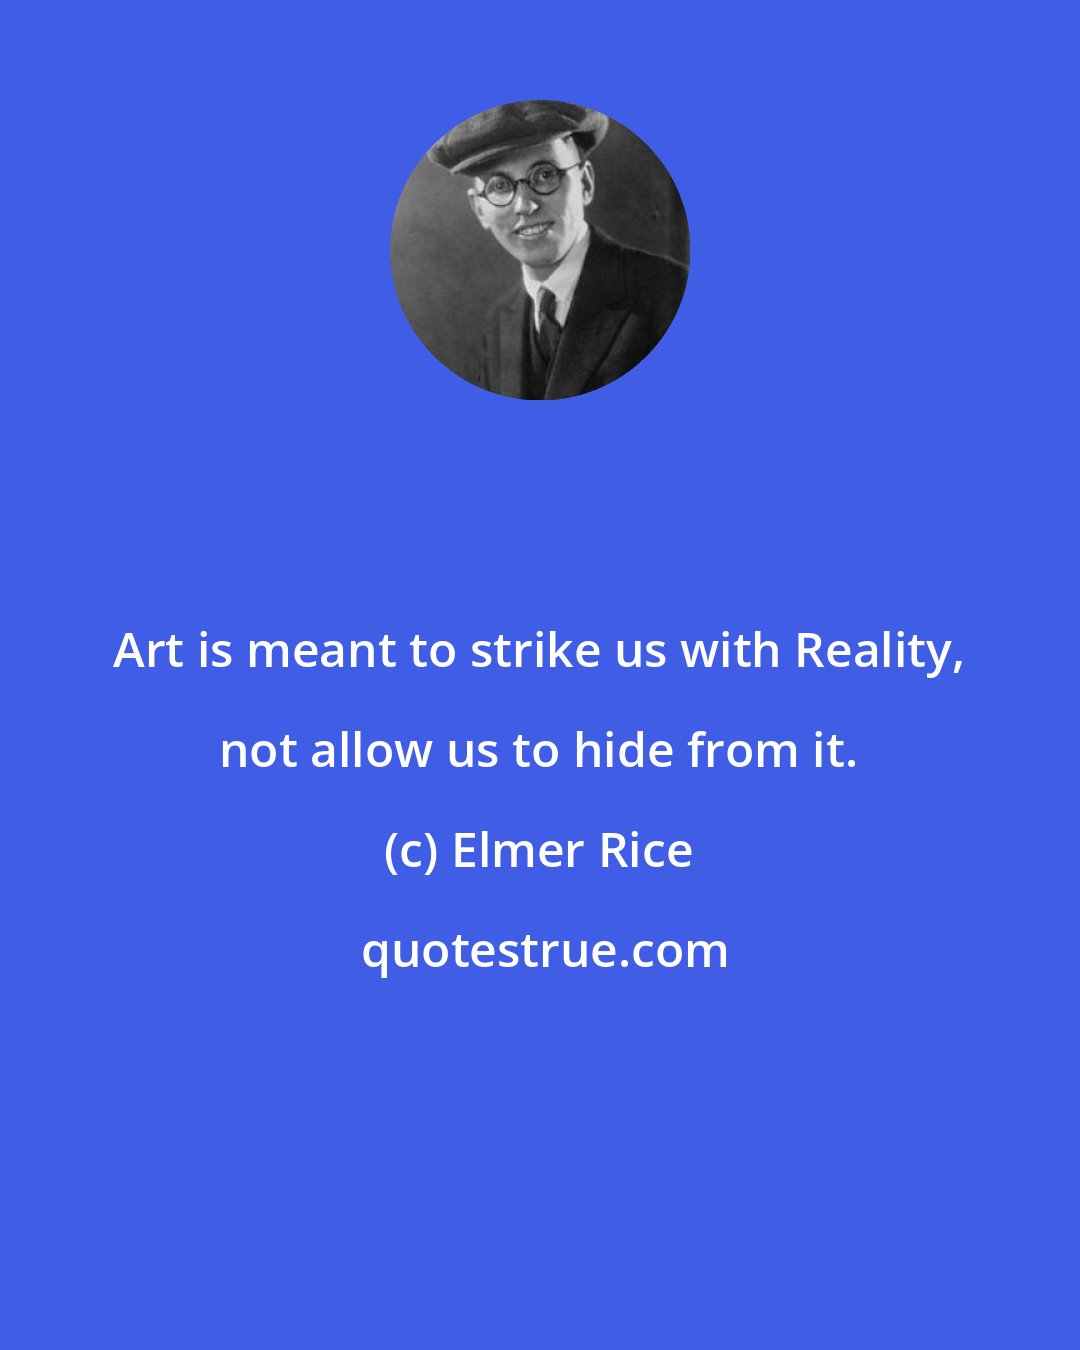 Elmer Rice: Art is meant to strike us with Reality, not allow us to hide from it.